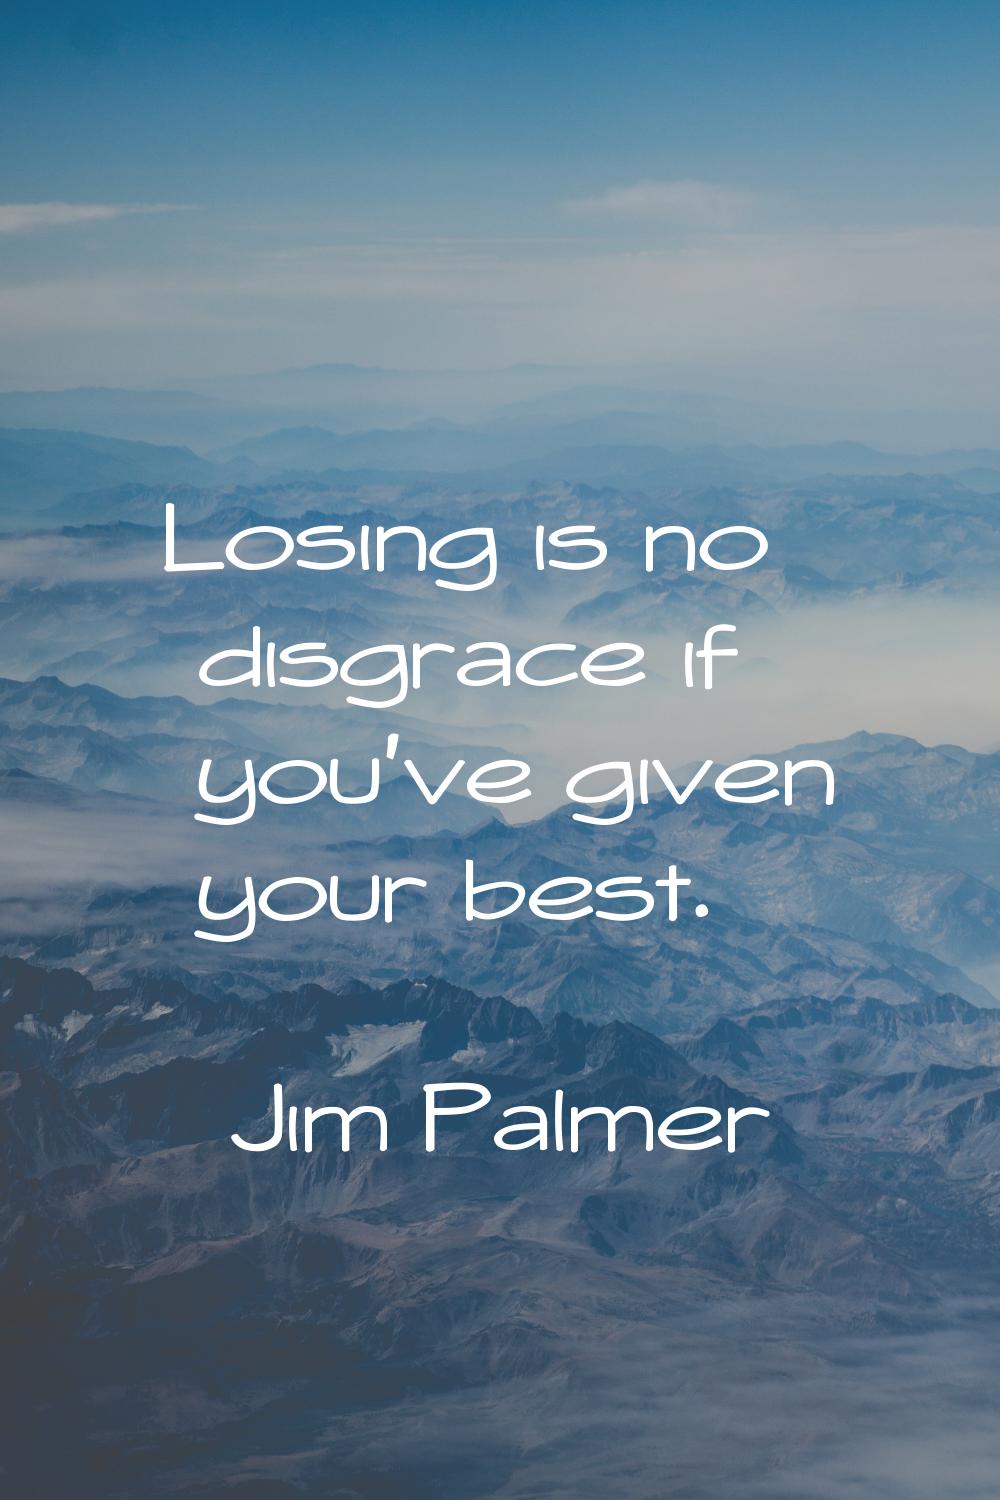 Losing is no disgrace if you've given your best.